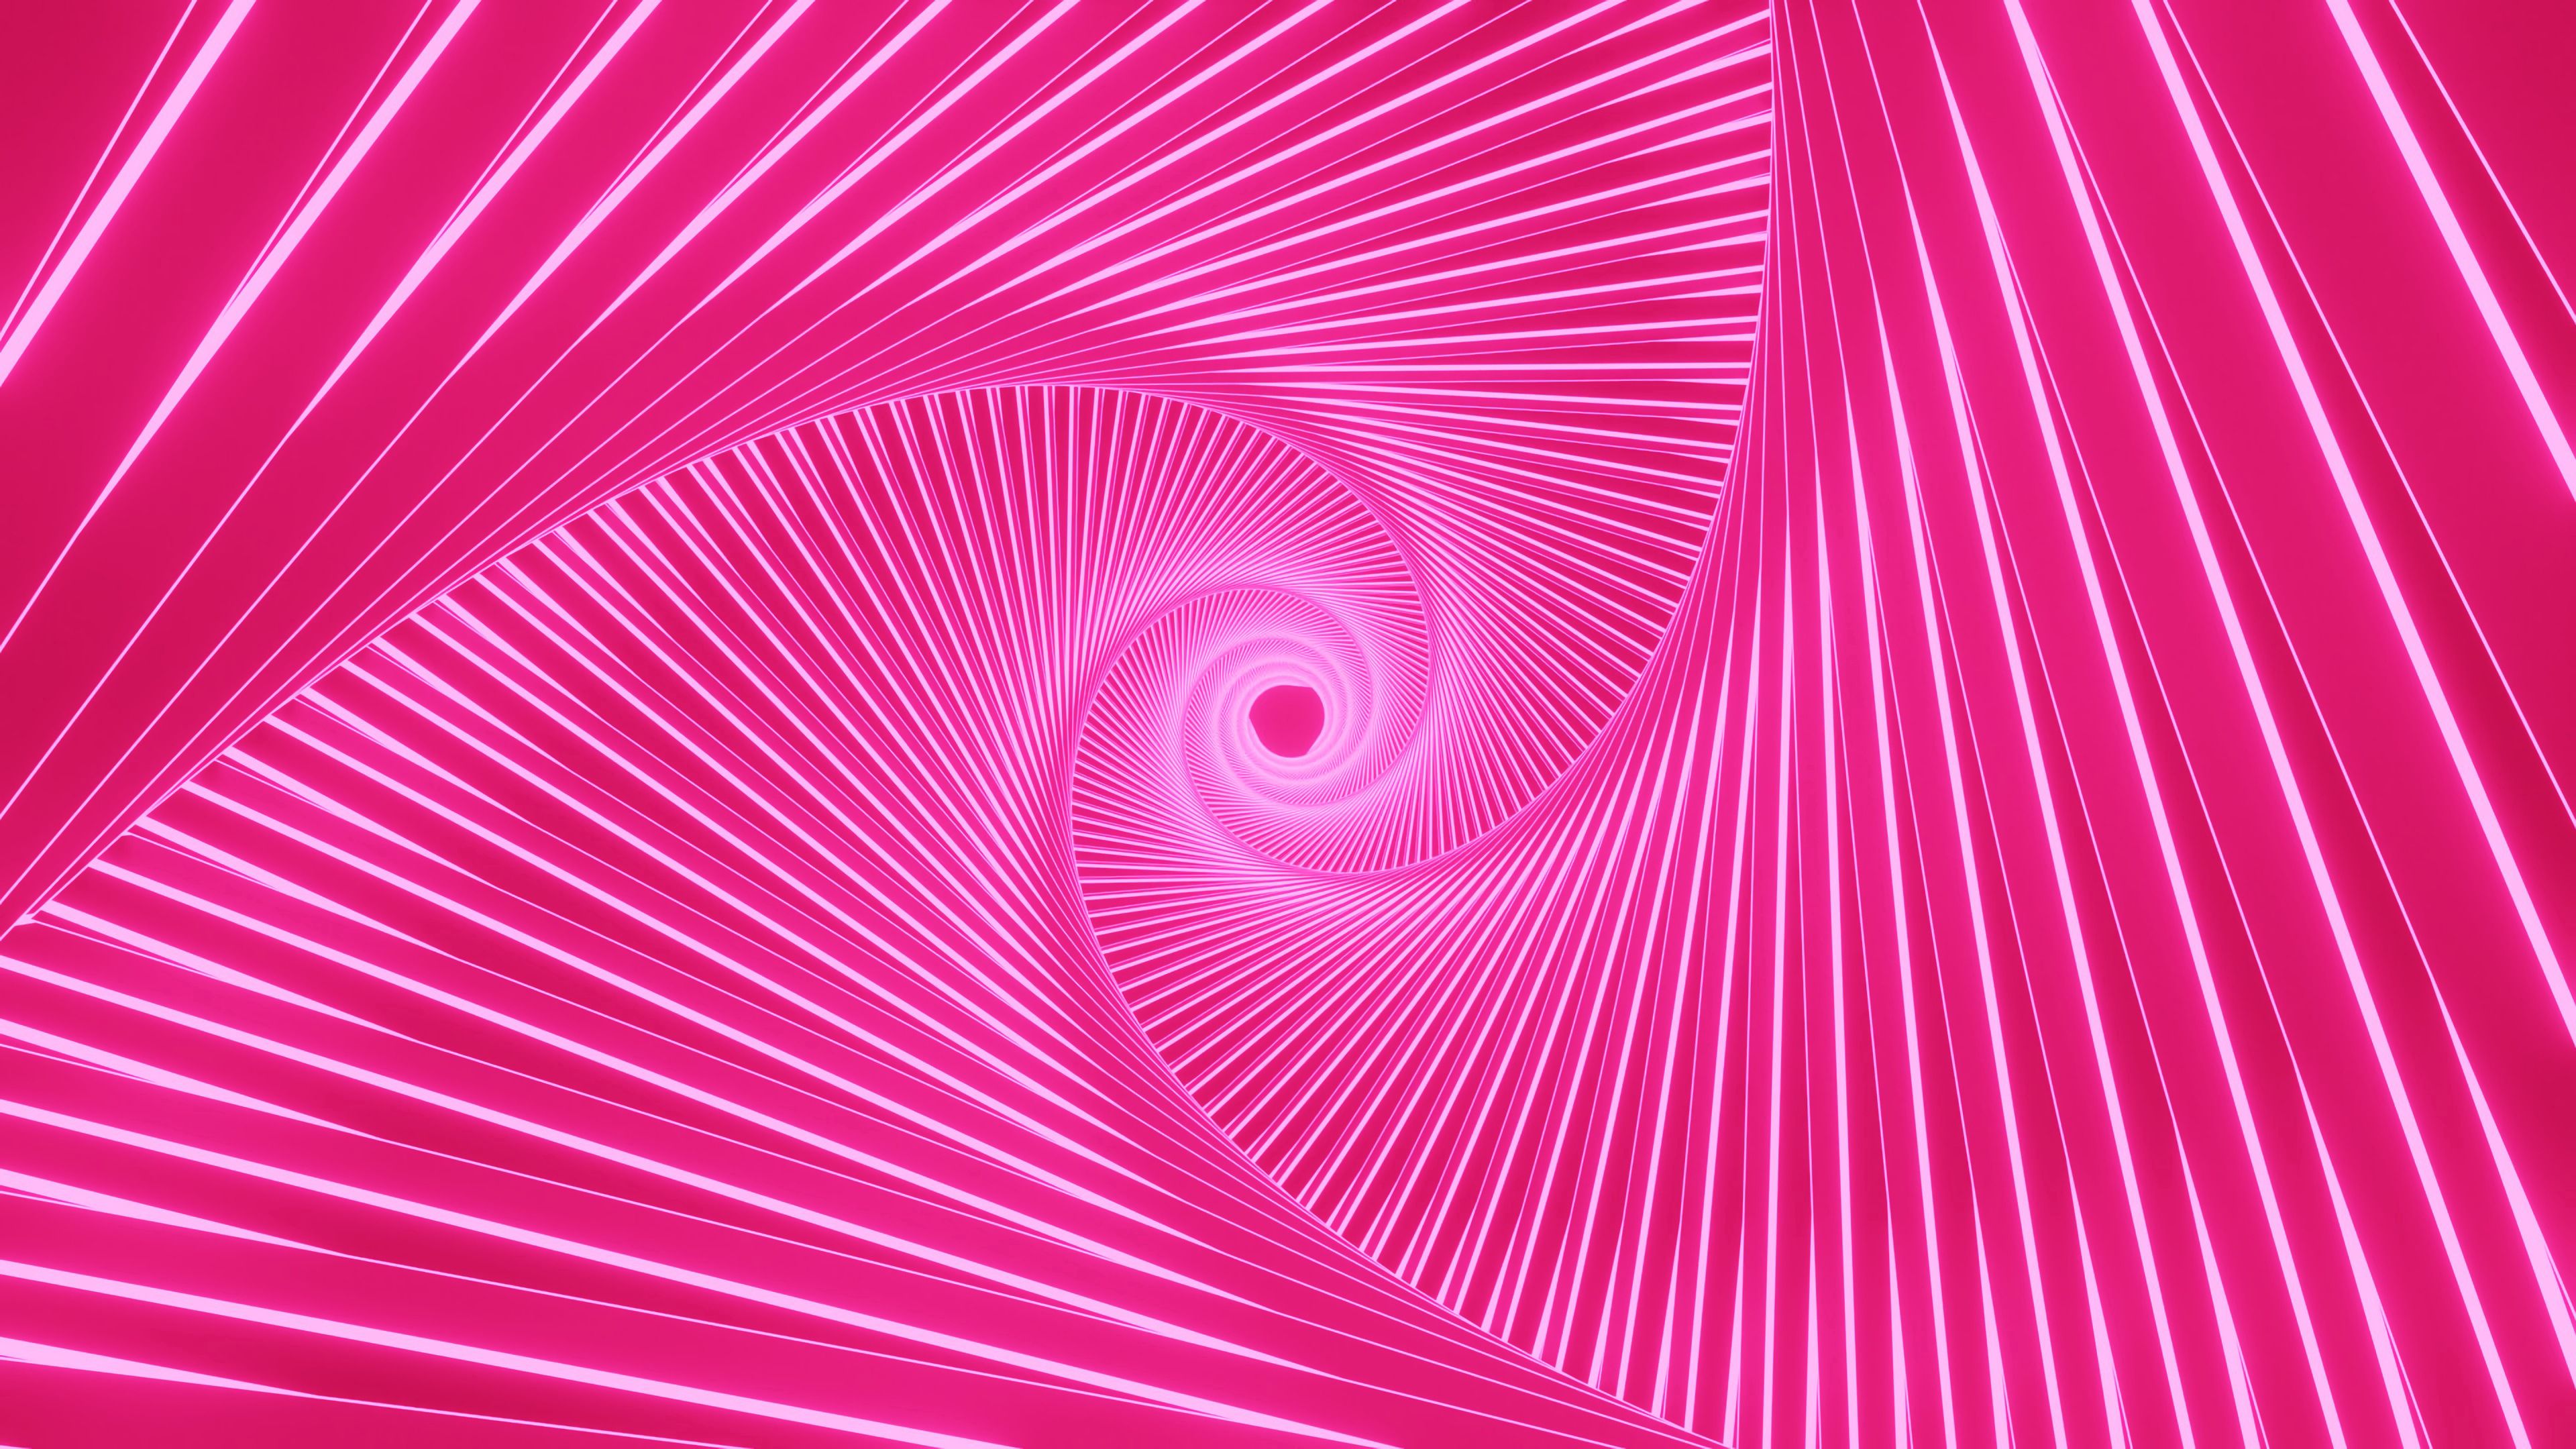 wallpapers pink, abstract, bright, glow, funnel, swirling, involute